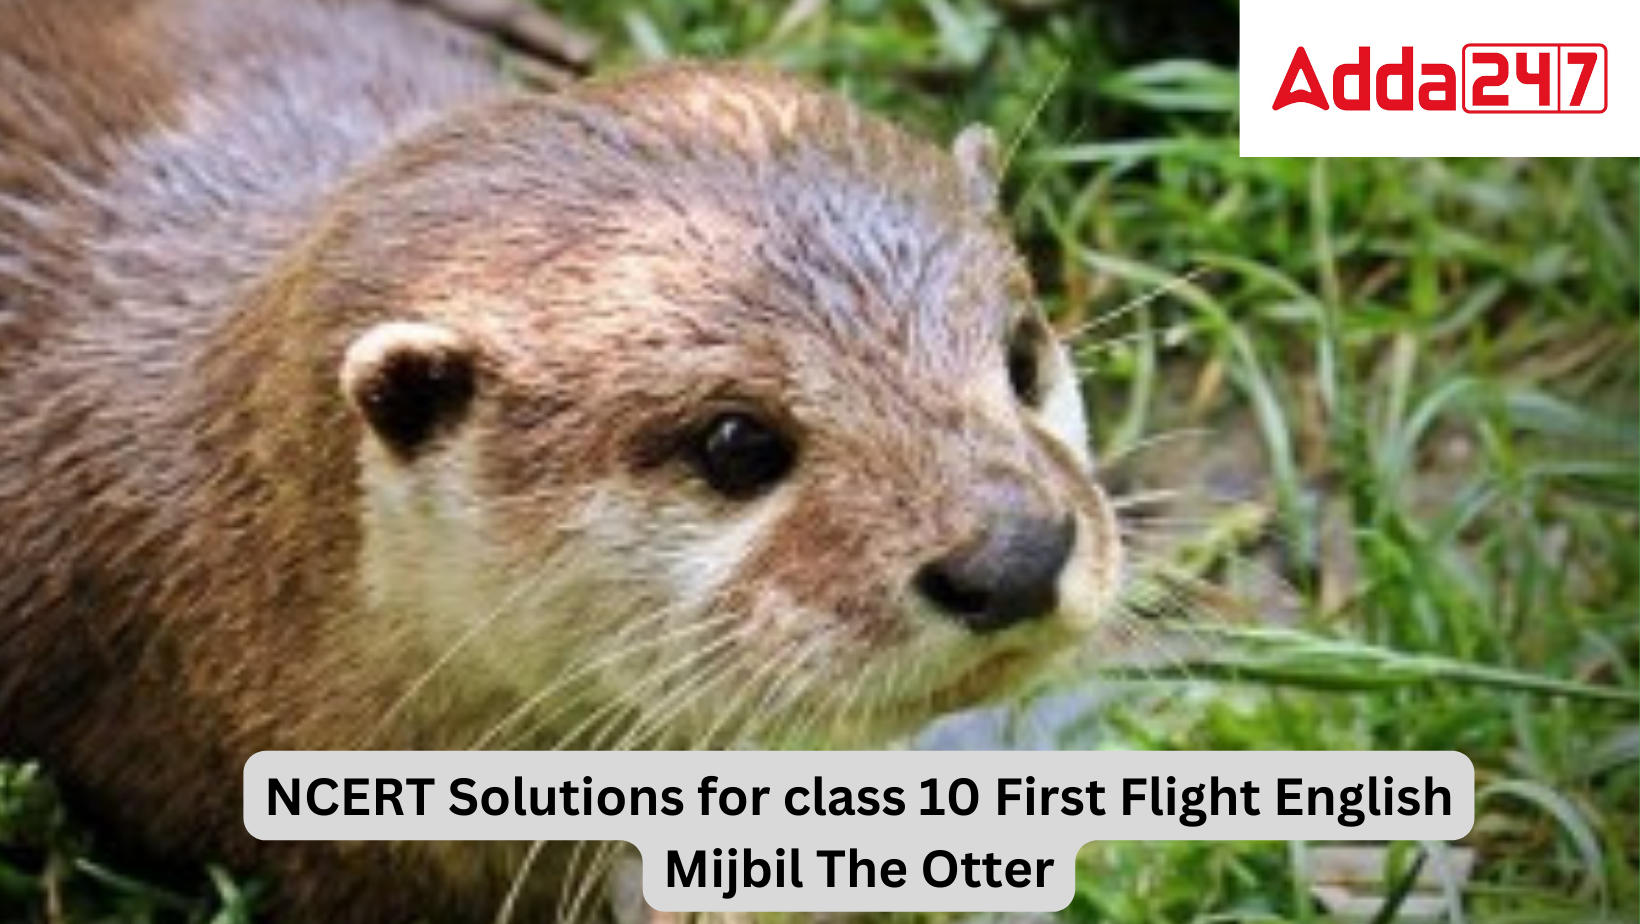 NCERT Solutions for class 10 First Flight English Mijbil The Otter